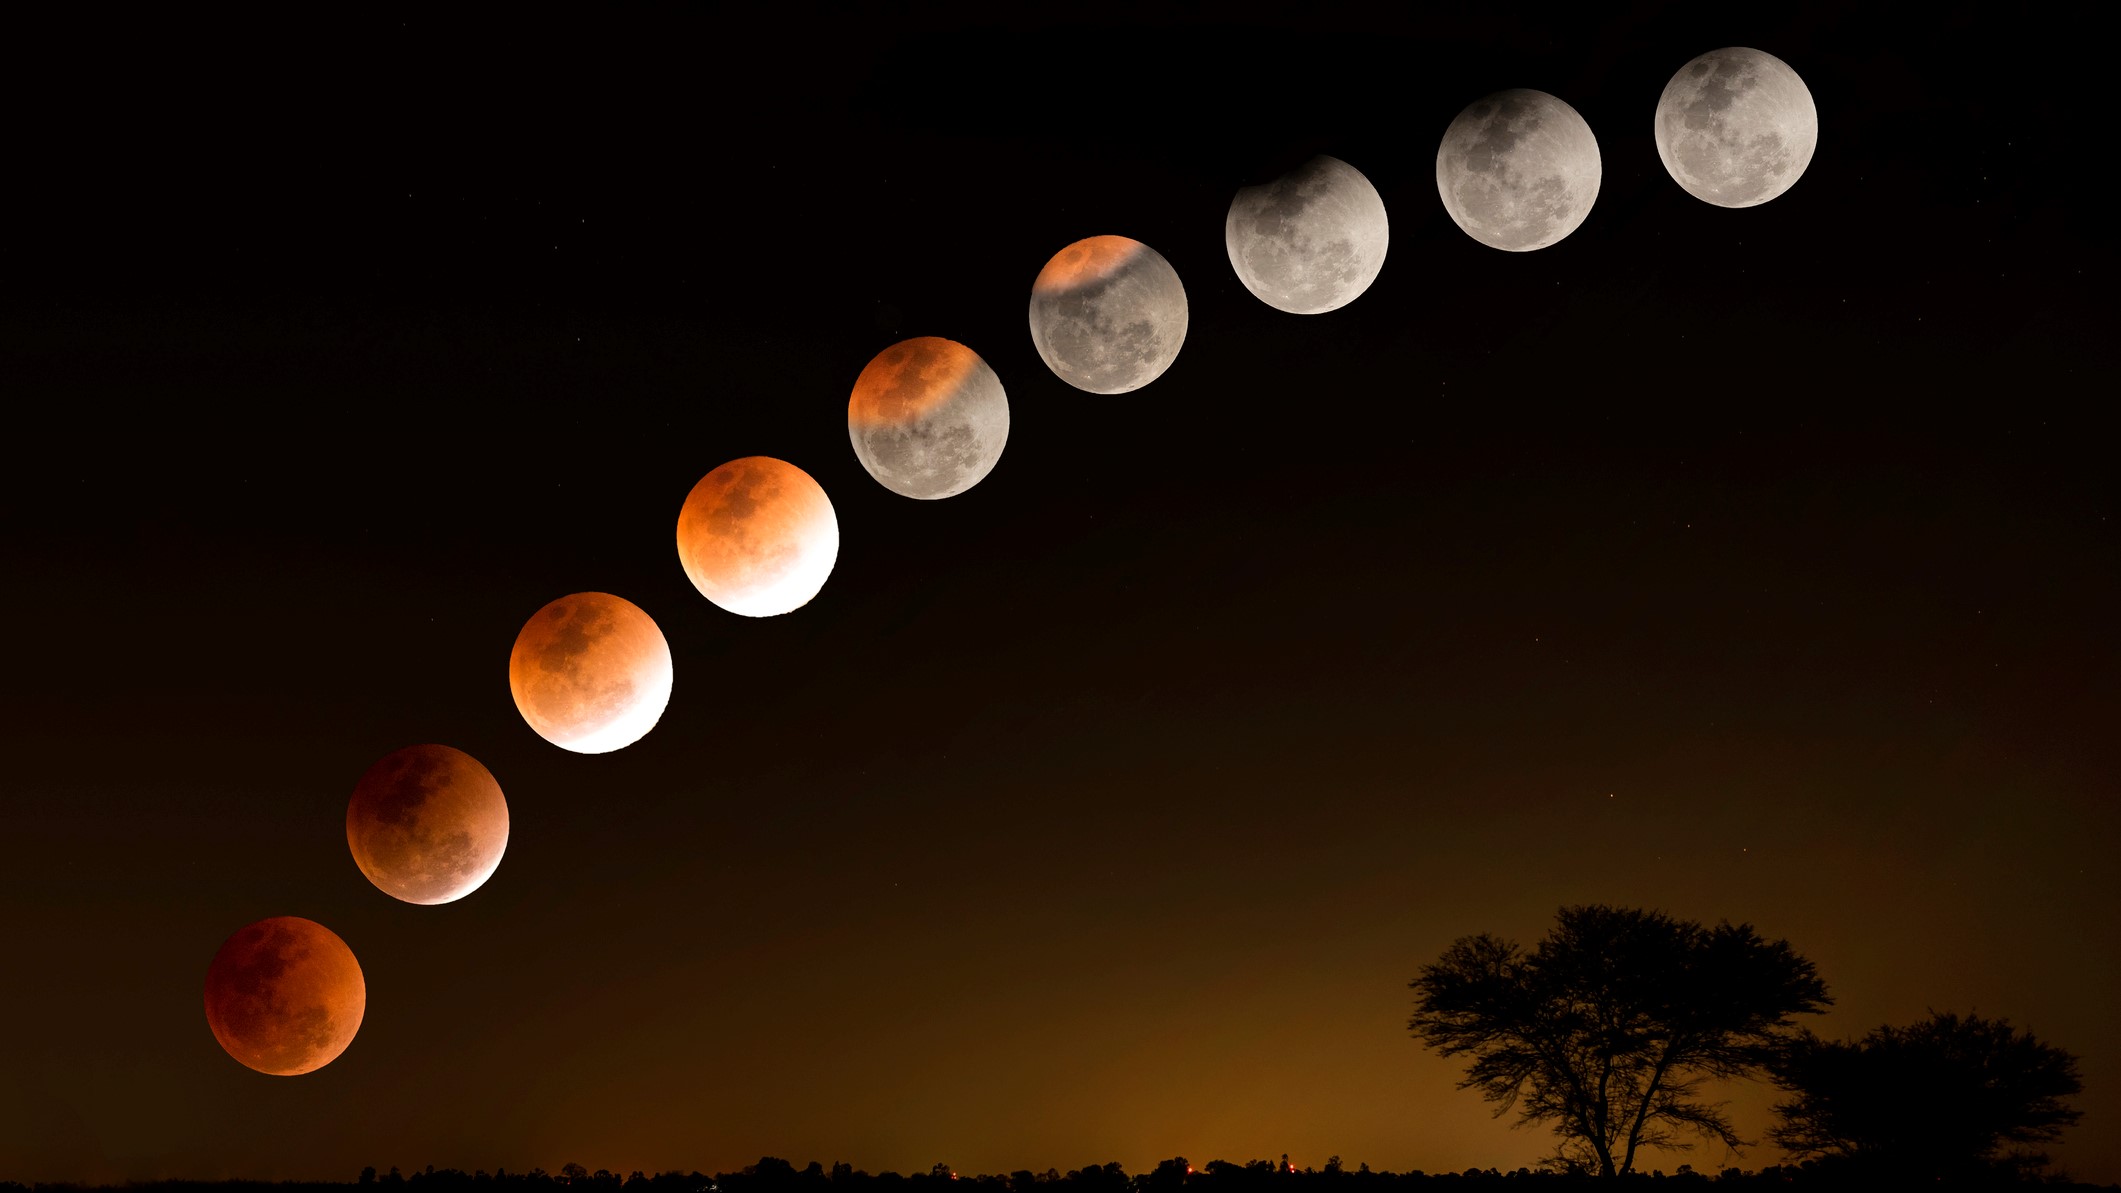 Lunar eclipse 2022 guide: When, where & how to see them thumbnail